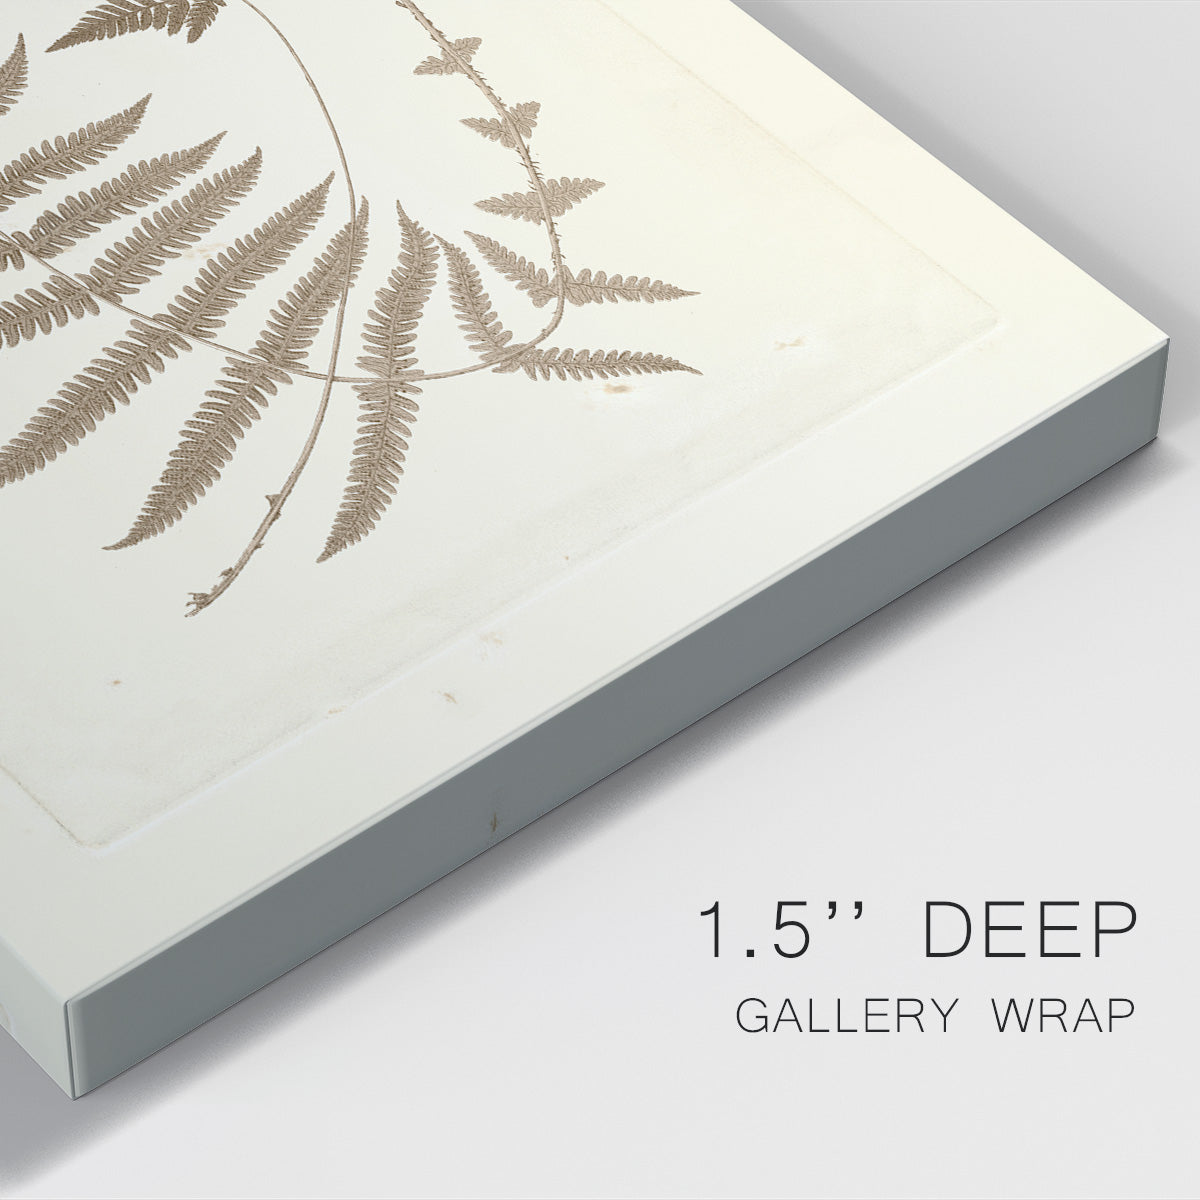 Sepia Ferns V Premium Gallery Wrapped Canvas - Ready to Hang